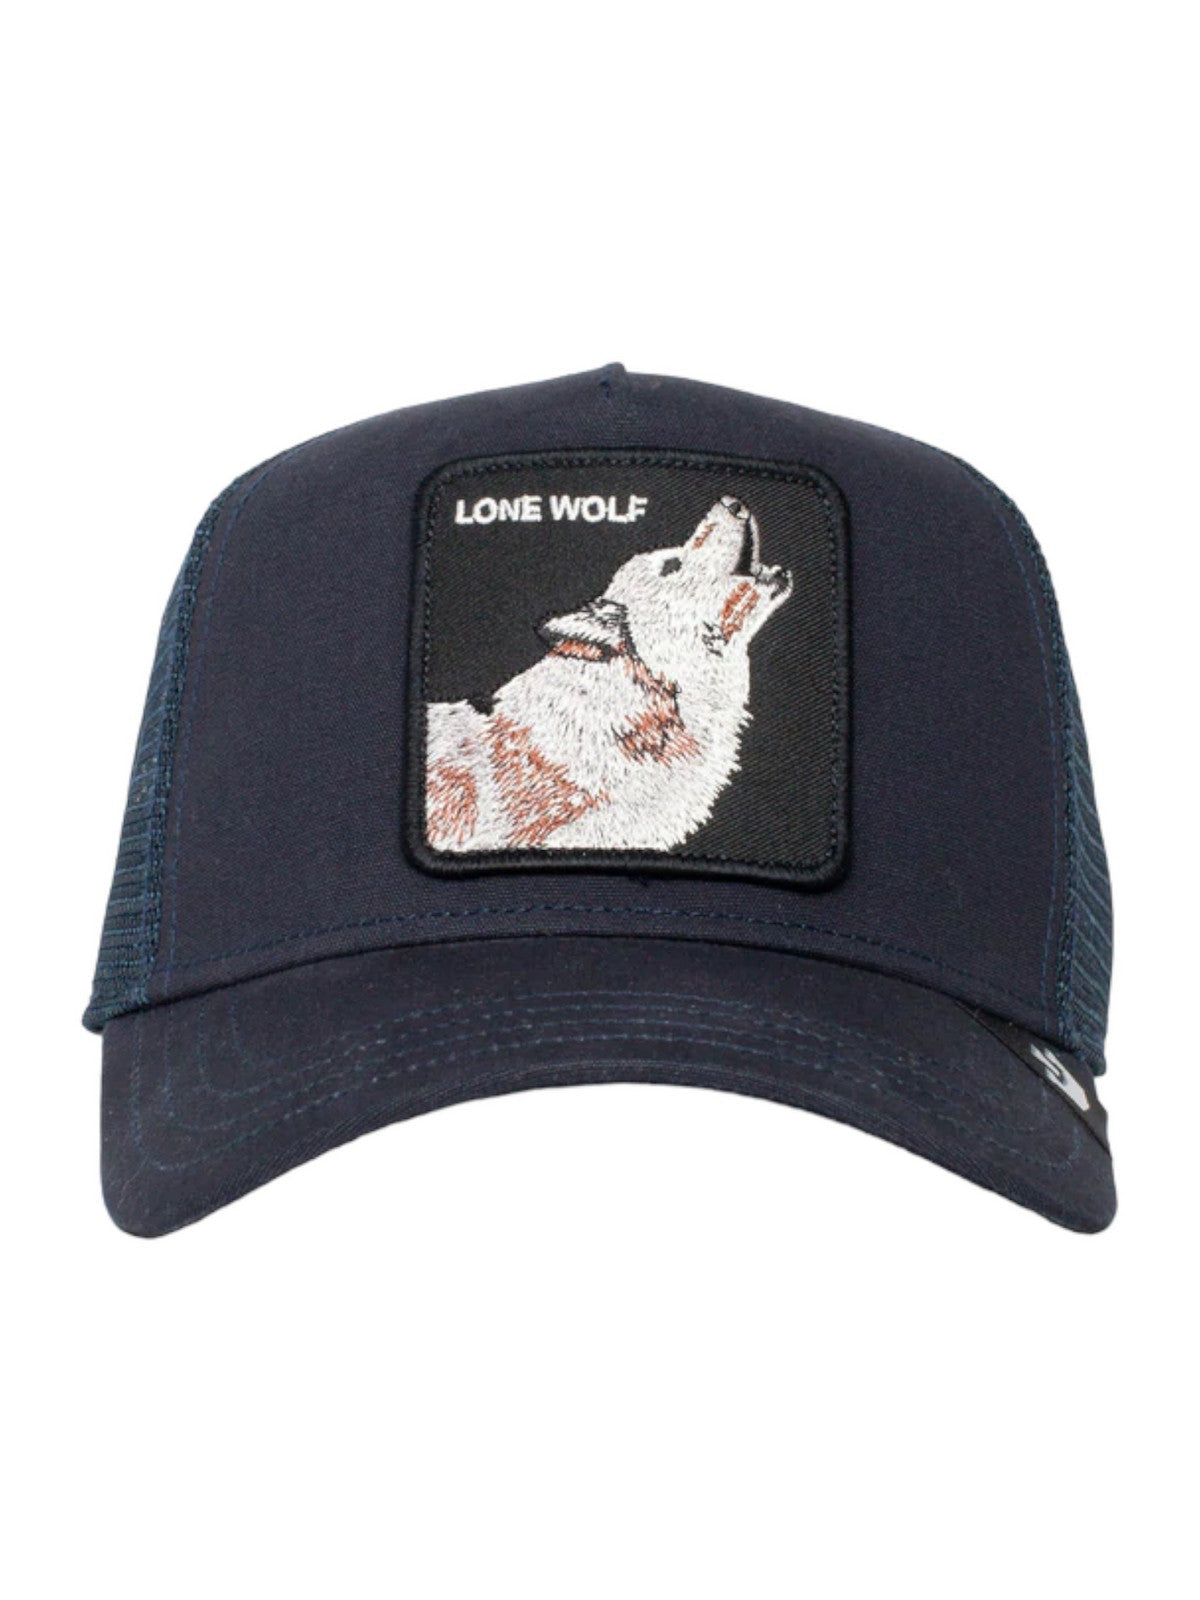 GOORIN BROS Casquette homme The lone wolf 101-0389-NVY Bleu